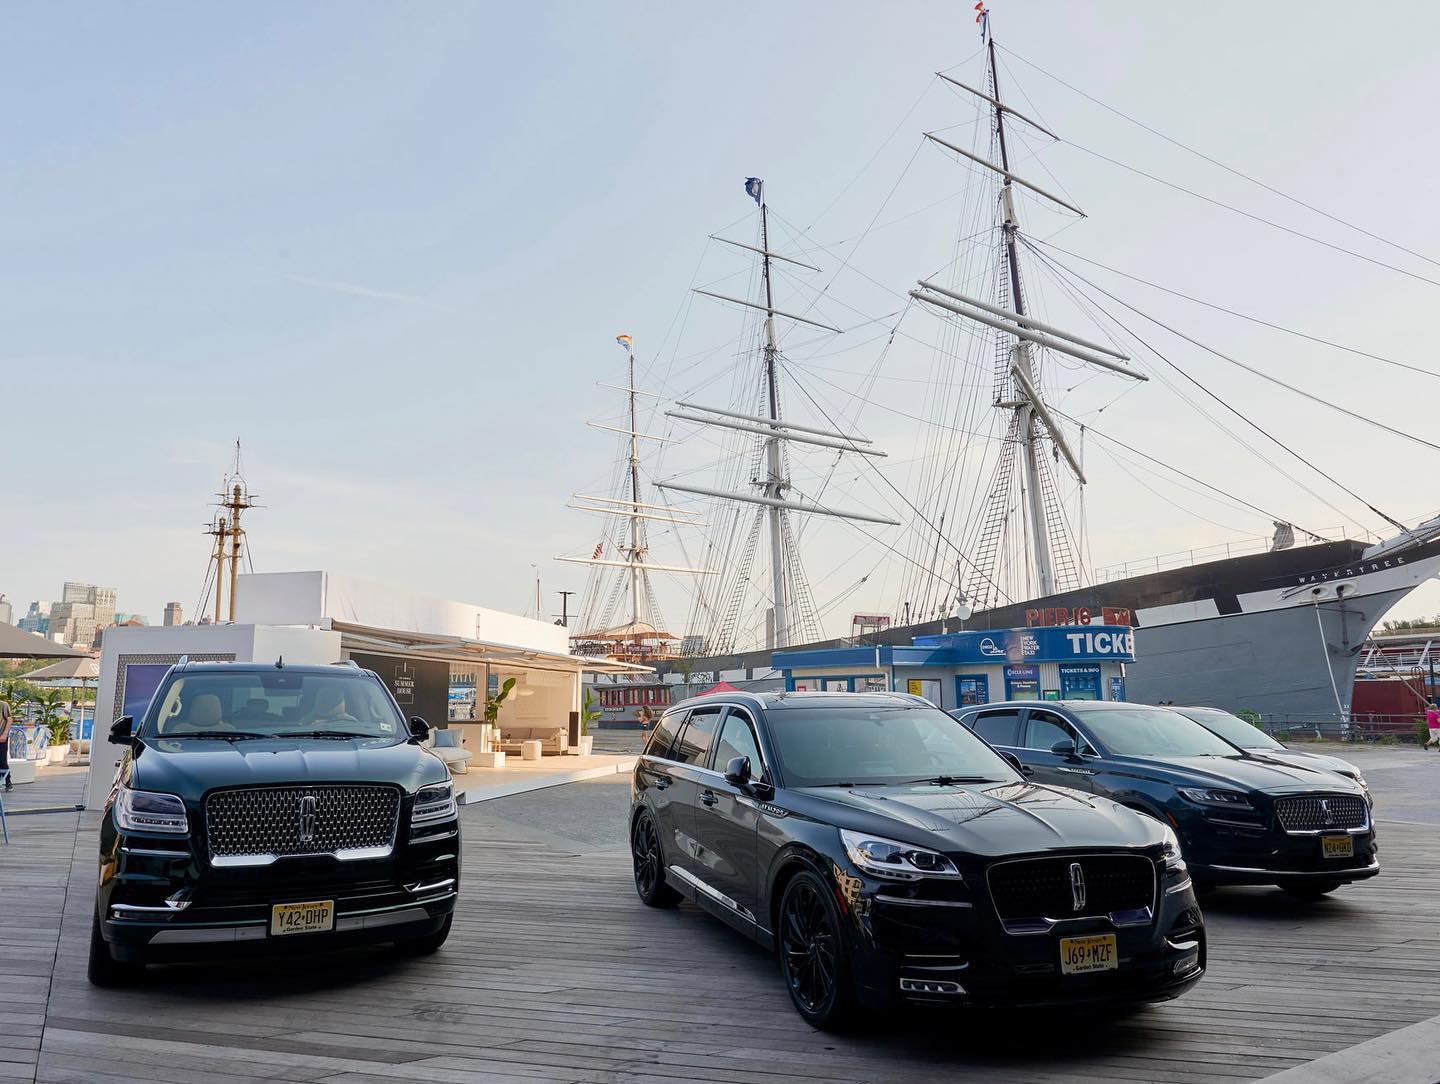 Support local schools. Explore @lincoln vehicles. Participate in an exclusive giveaway. This Weekend ➤ Taste of The Seaport October 16 ✶ 12-3pm #TheSeaport #TasteOfTheSeaport #LincolnPartner